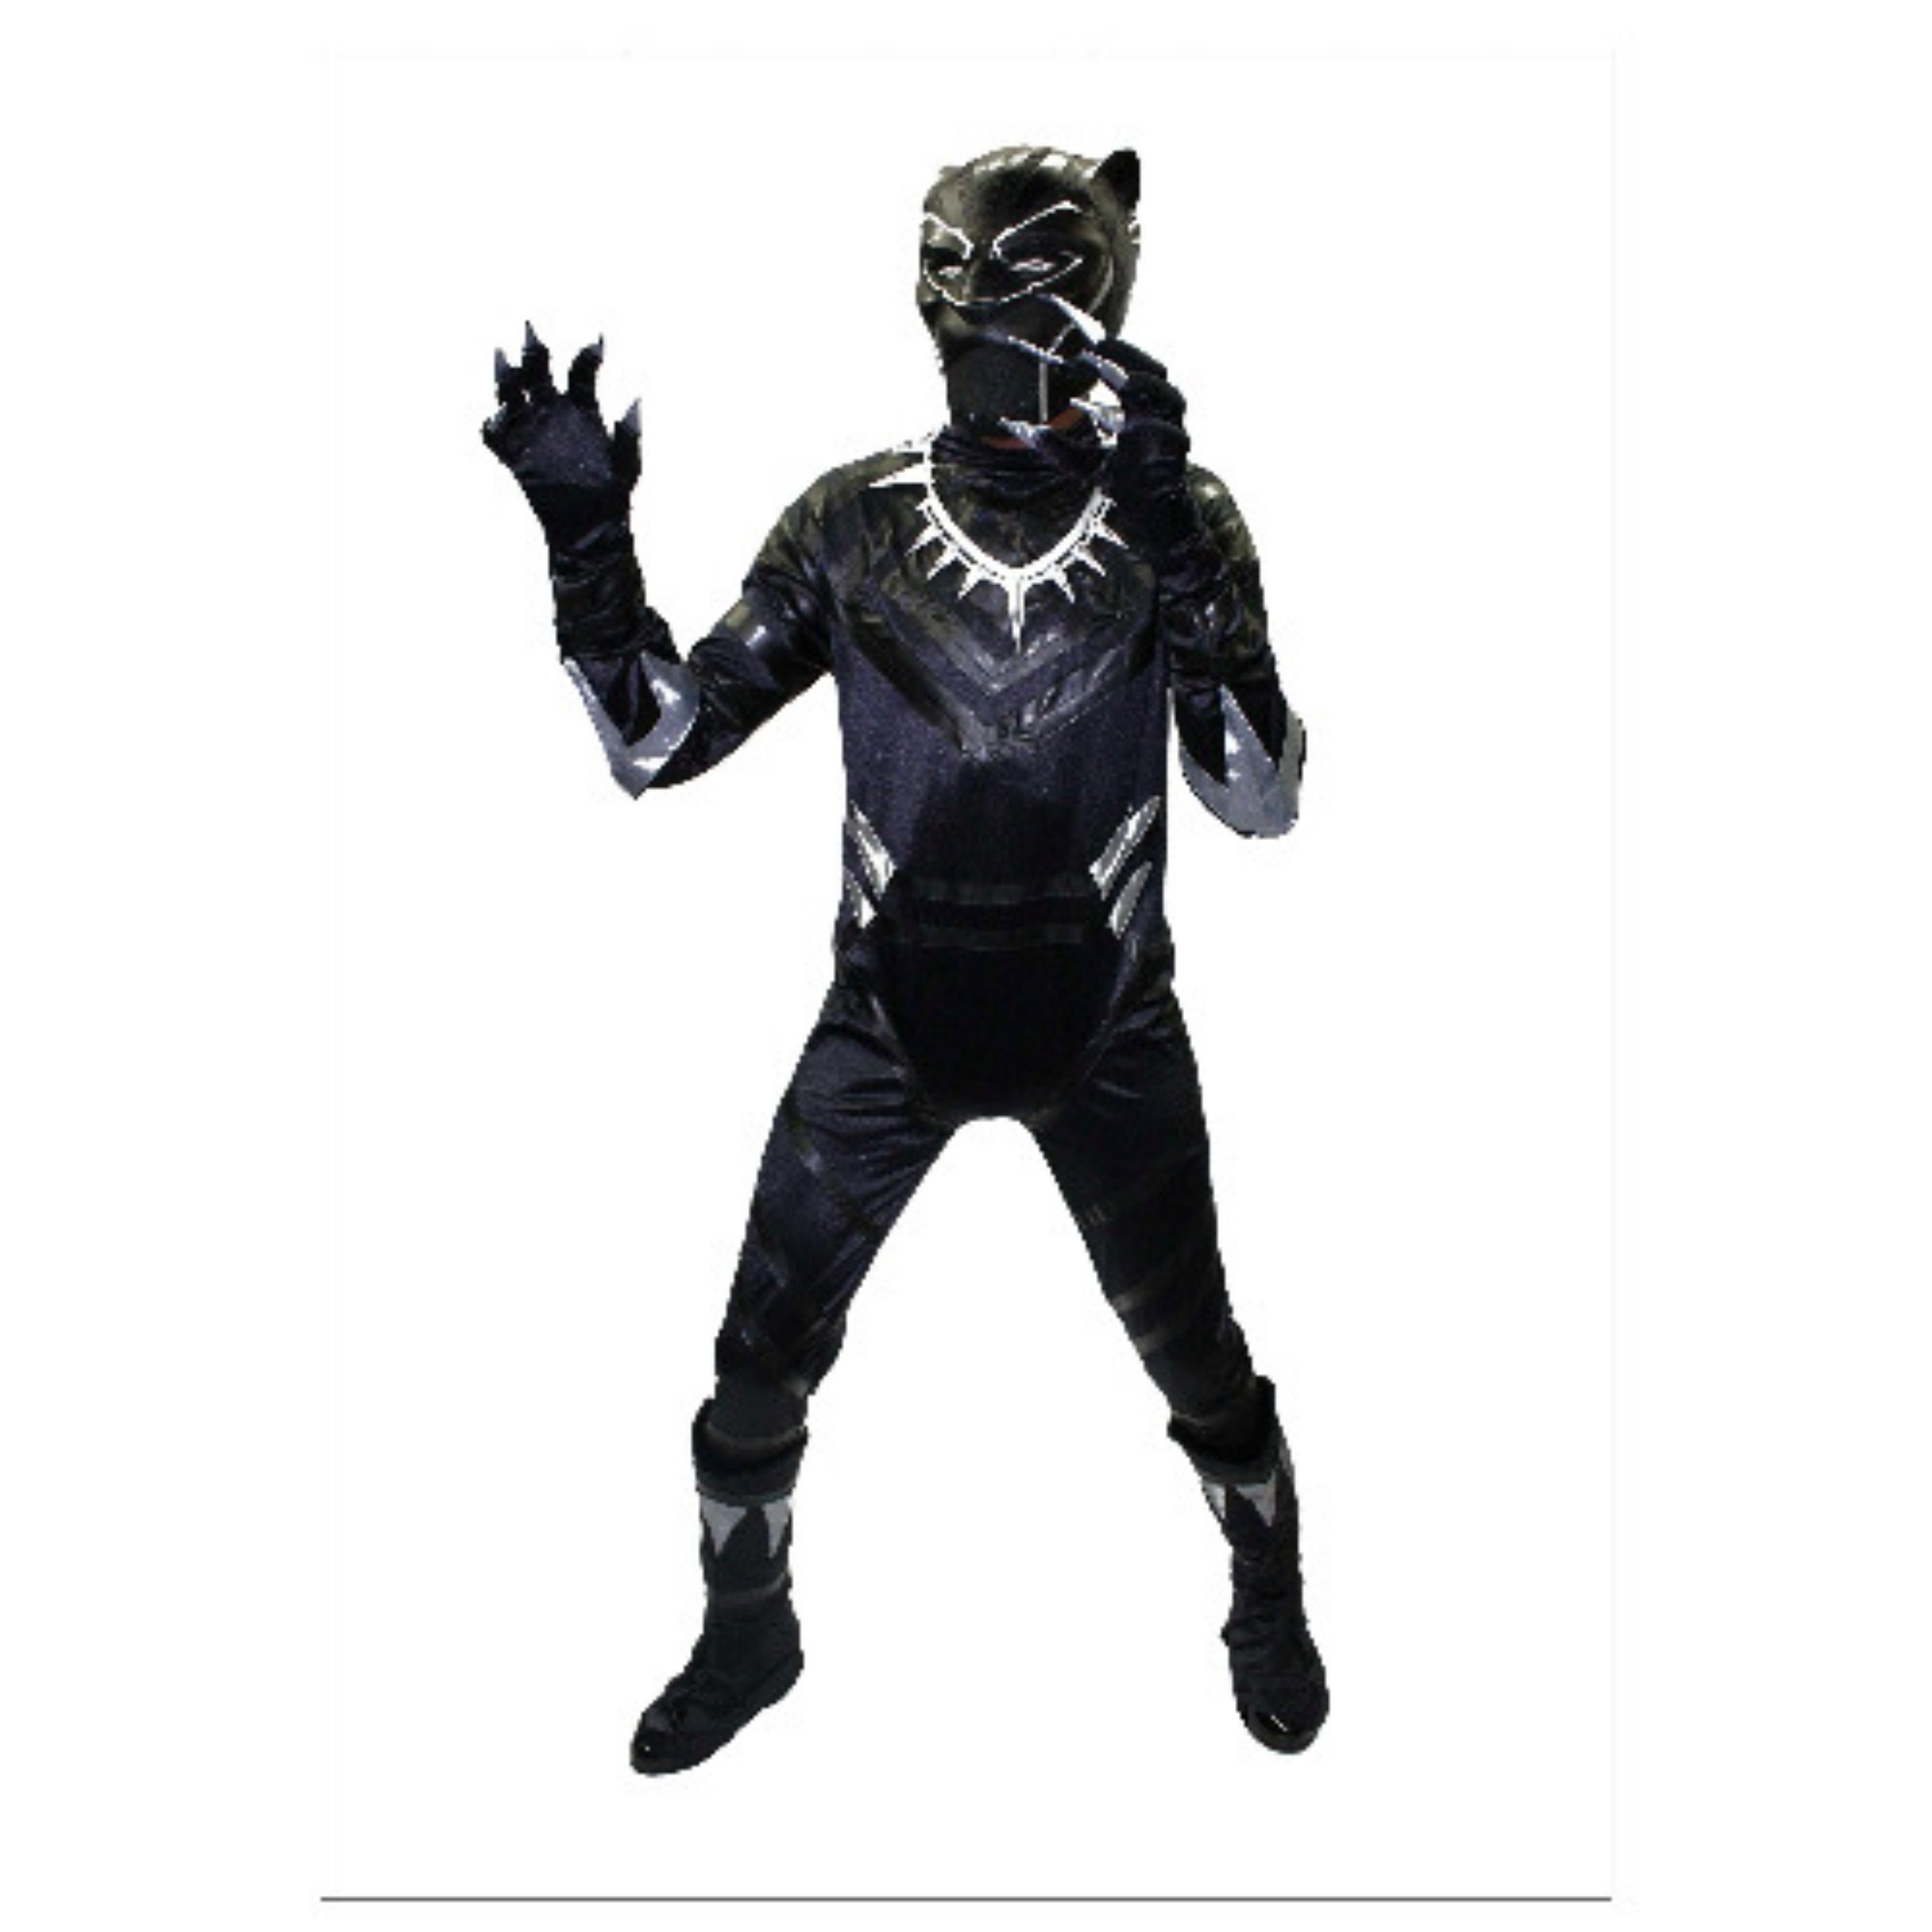 Costume for Black Panther worn by Chadwick Boseman  National Museum of  African American History and Culture